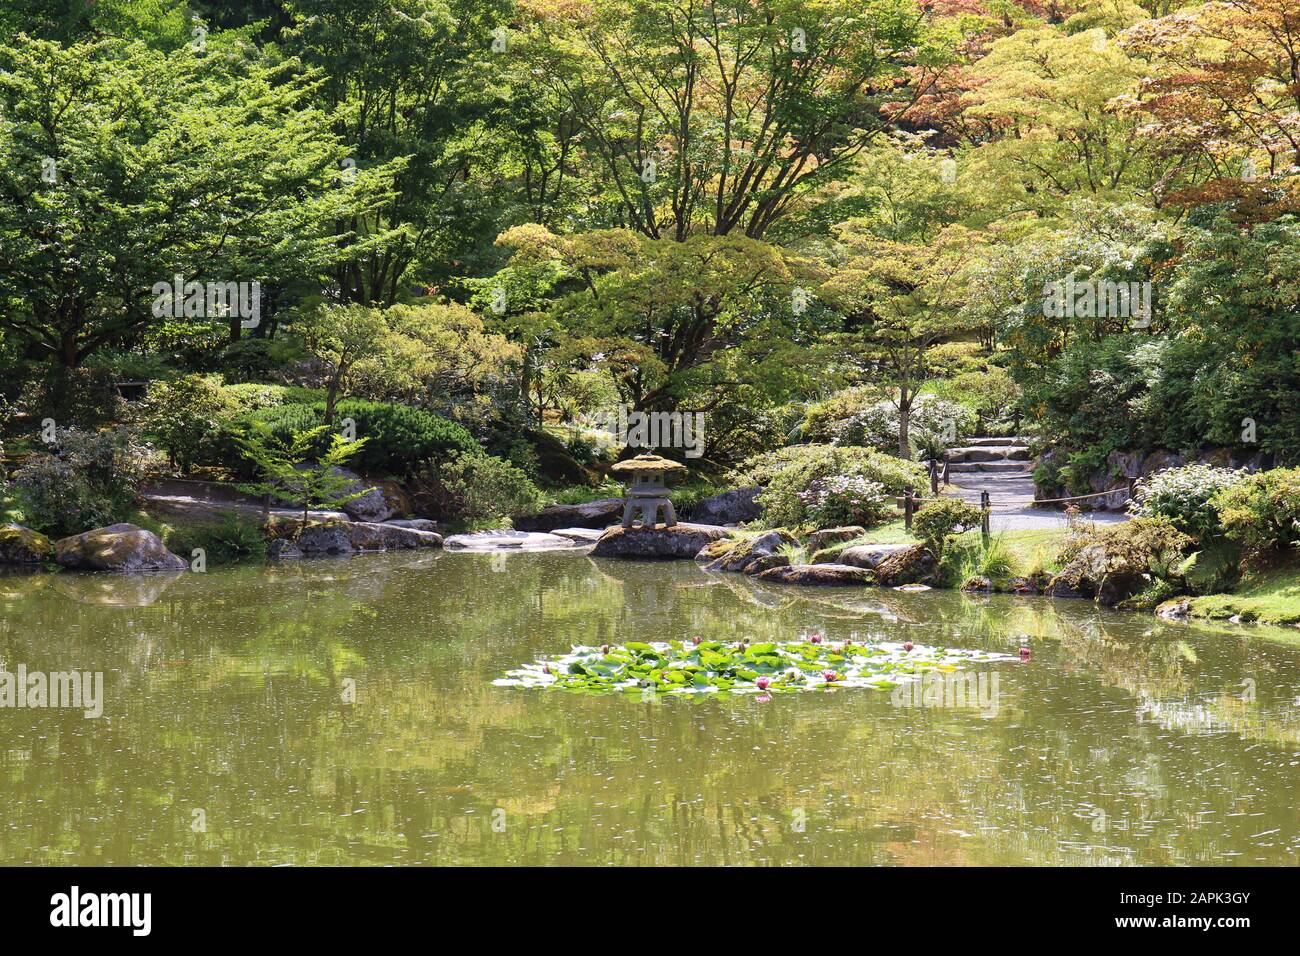 Japanese Maple trees, evergreens, shrubs and ferns backing a large pond with pink water lilies in a Japanese Garden in Seattle, Washington, USA Stock Photo